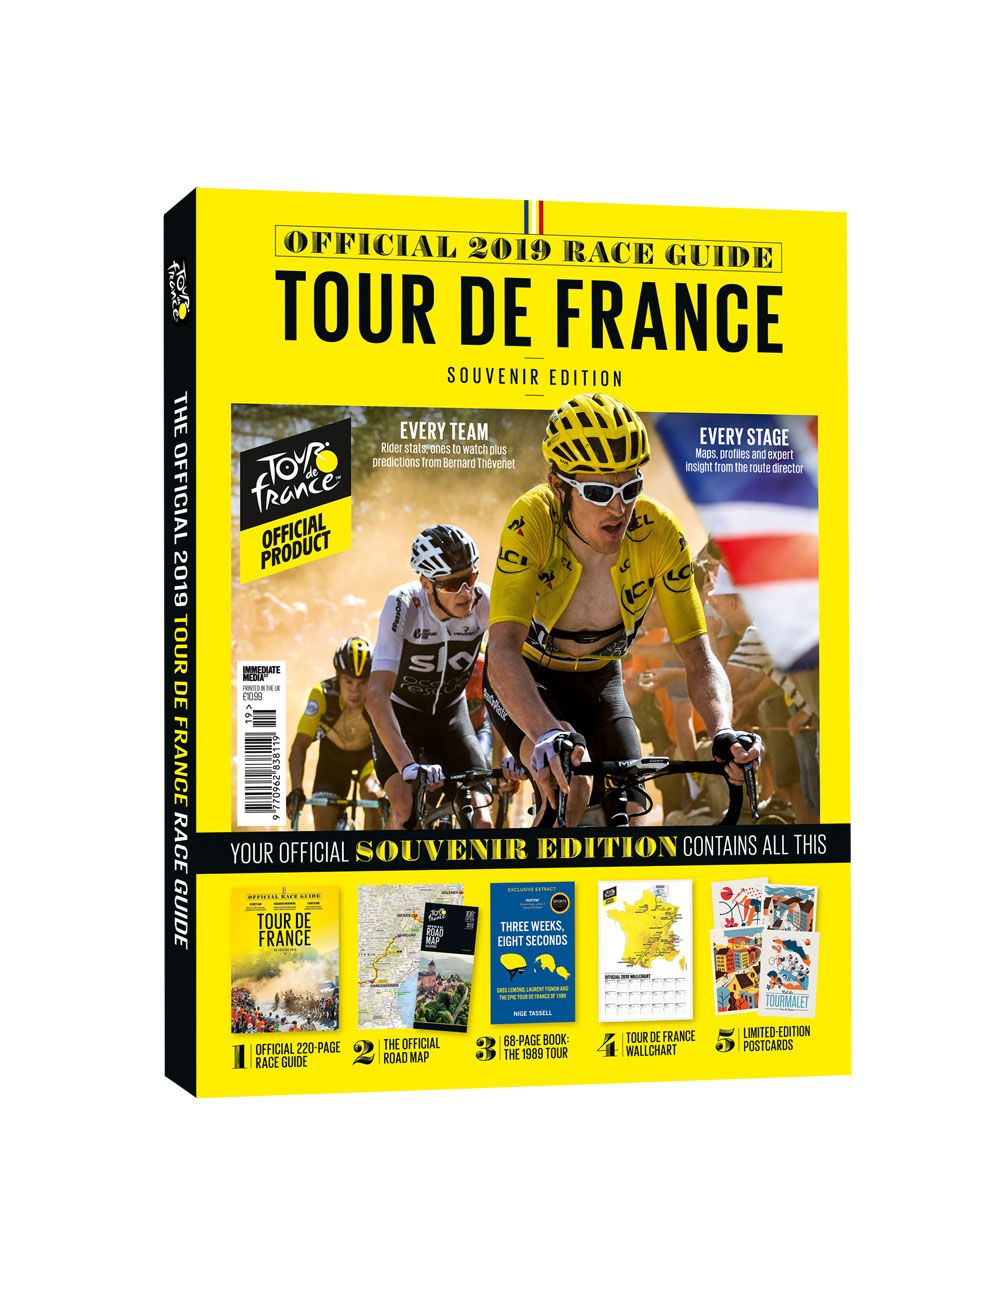 Official Tour de France Race Guide 2019 is available to pre-order now